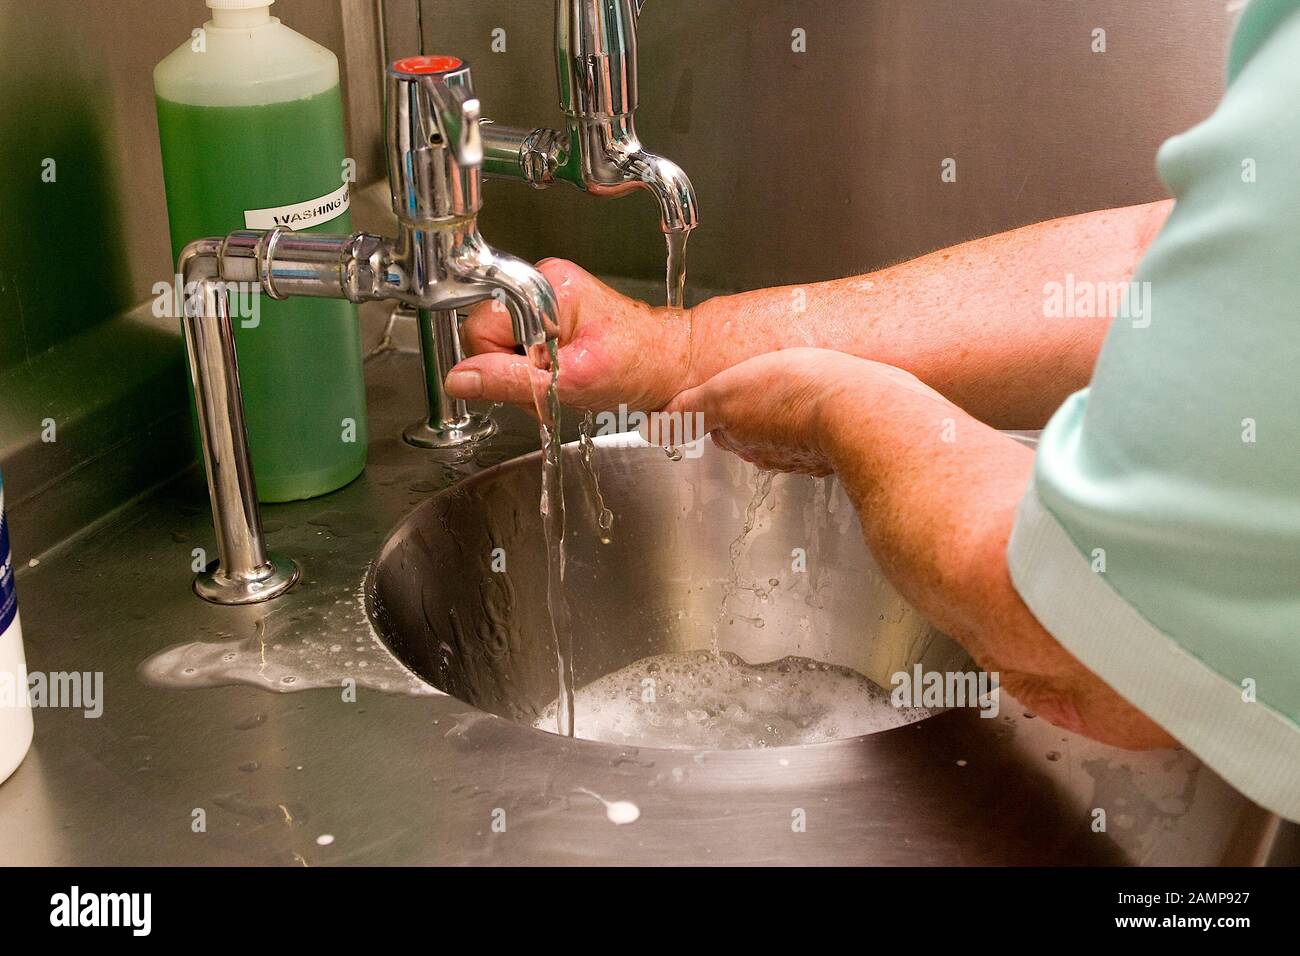 Female medical professional washing her hands at a sink. Stock Photo